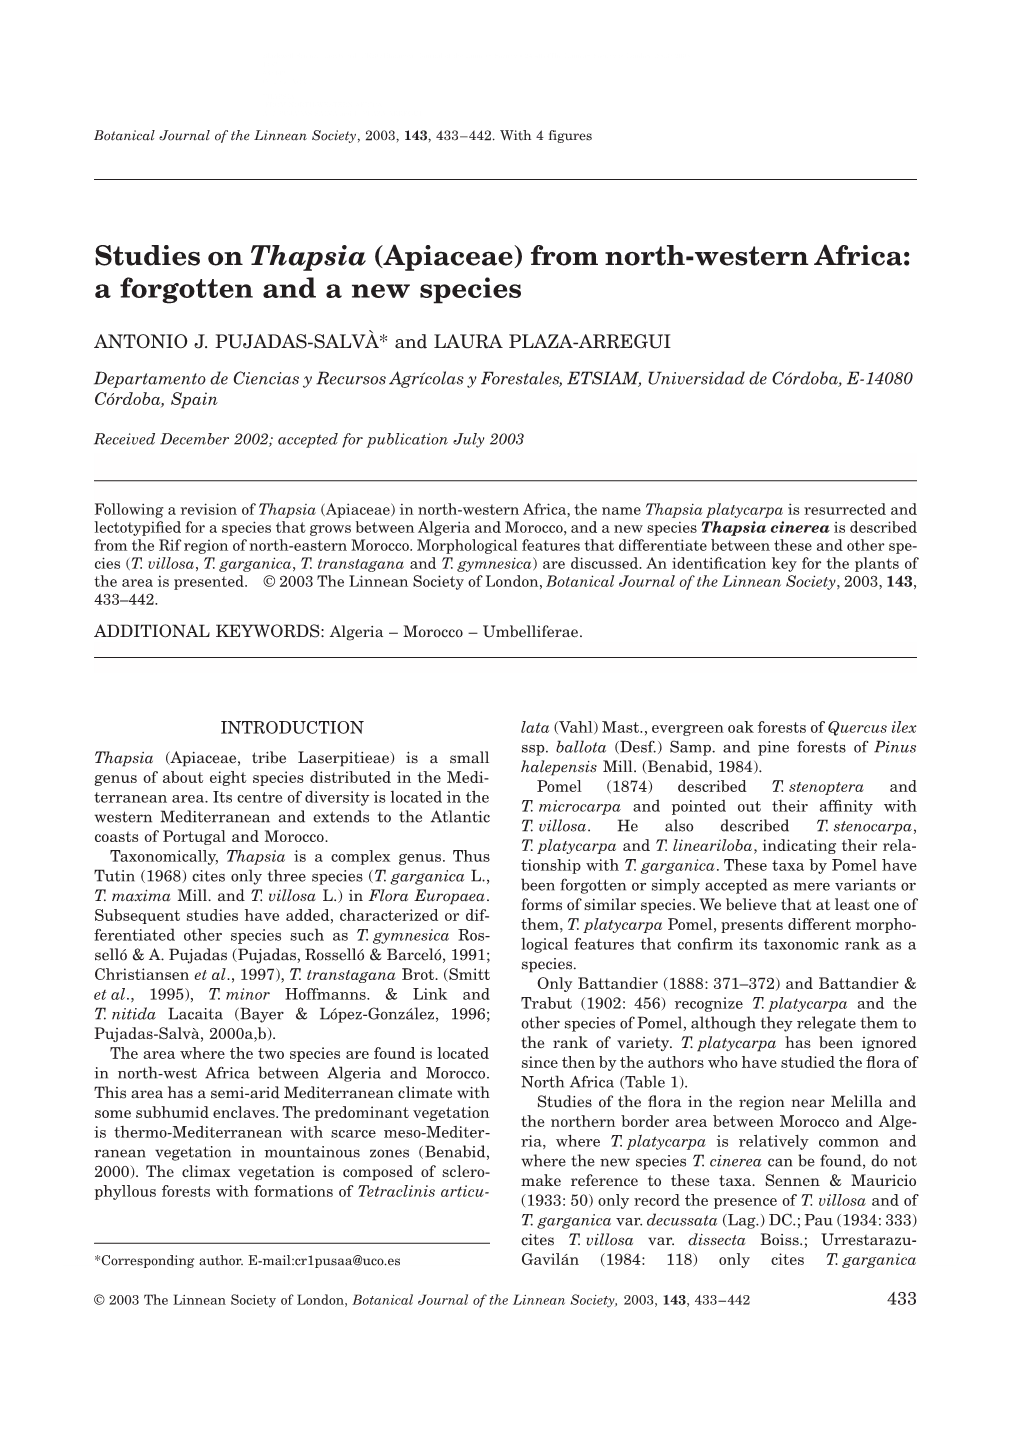 Studies on Thapsia (Apiaceae) from North-Western Africa: a Forgotten and a New Species